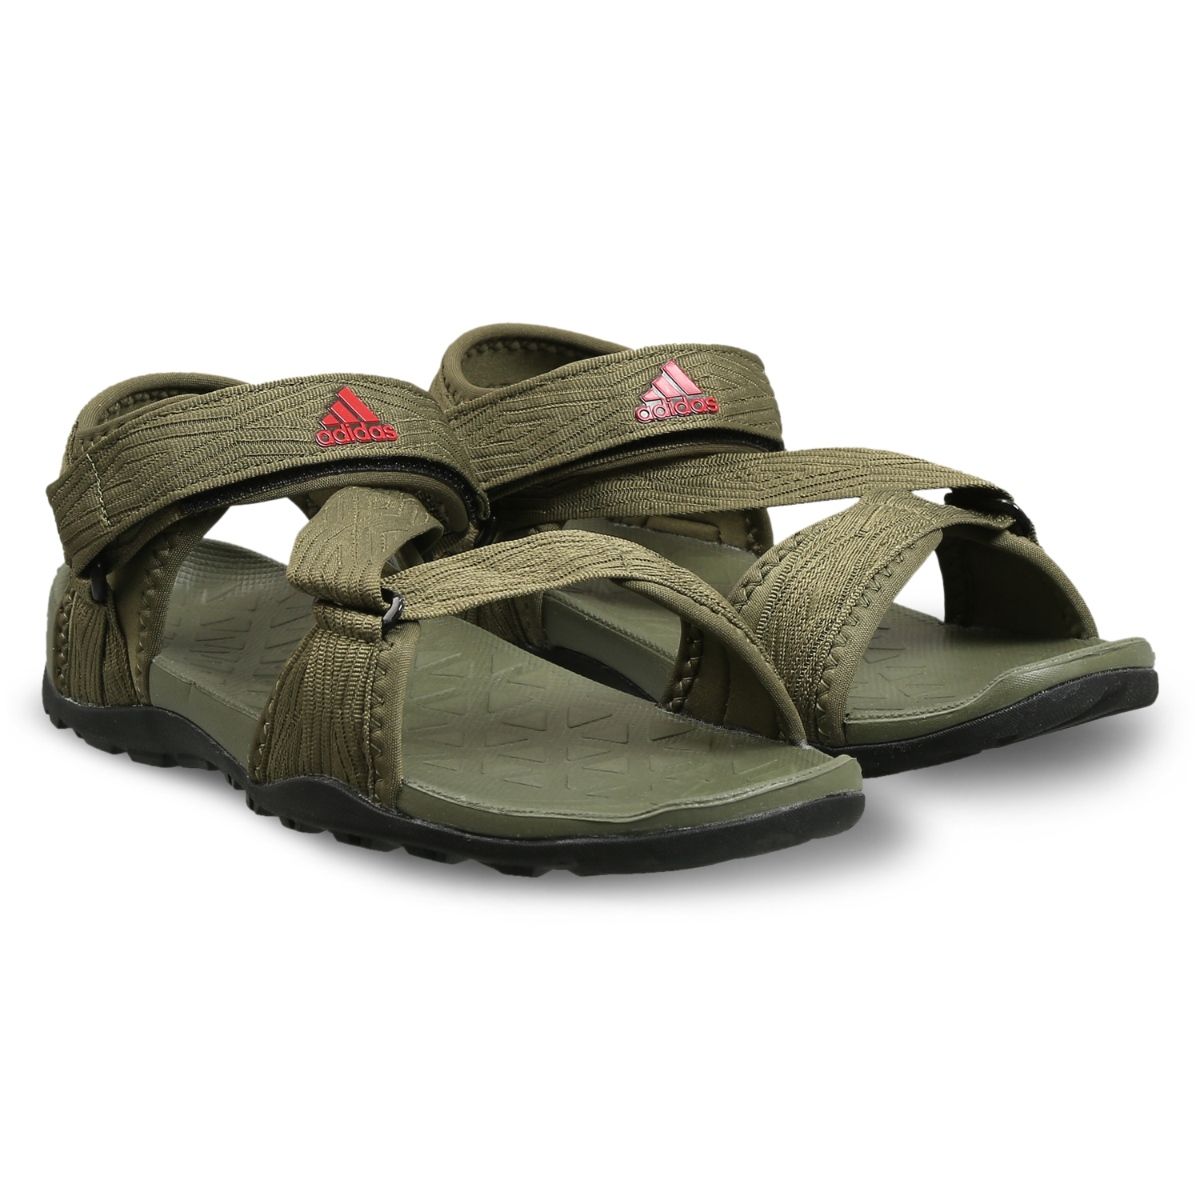 Share more than 186 adidas olive green sandals best